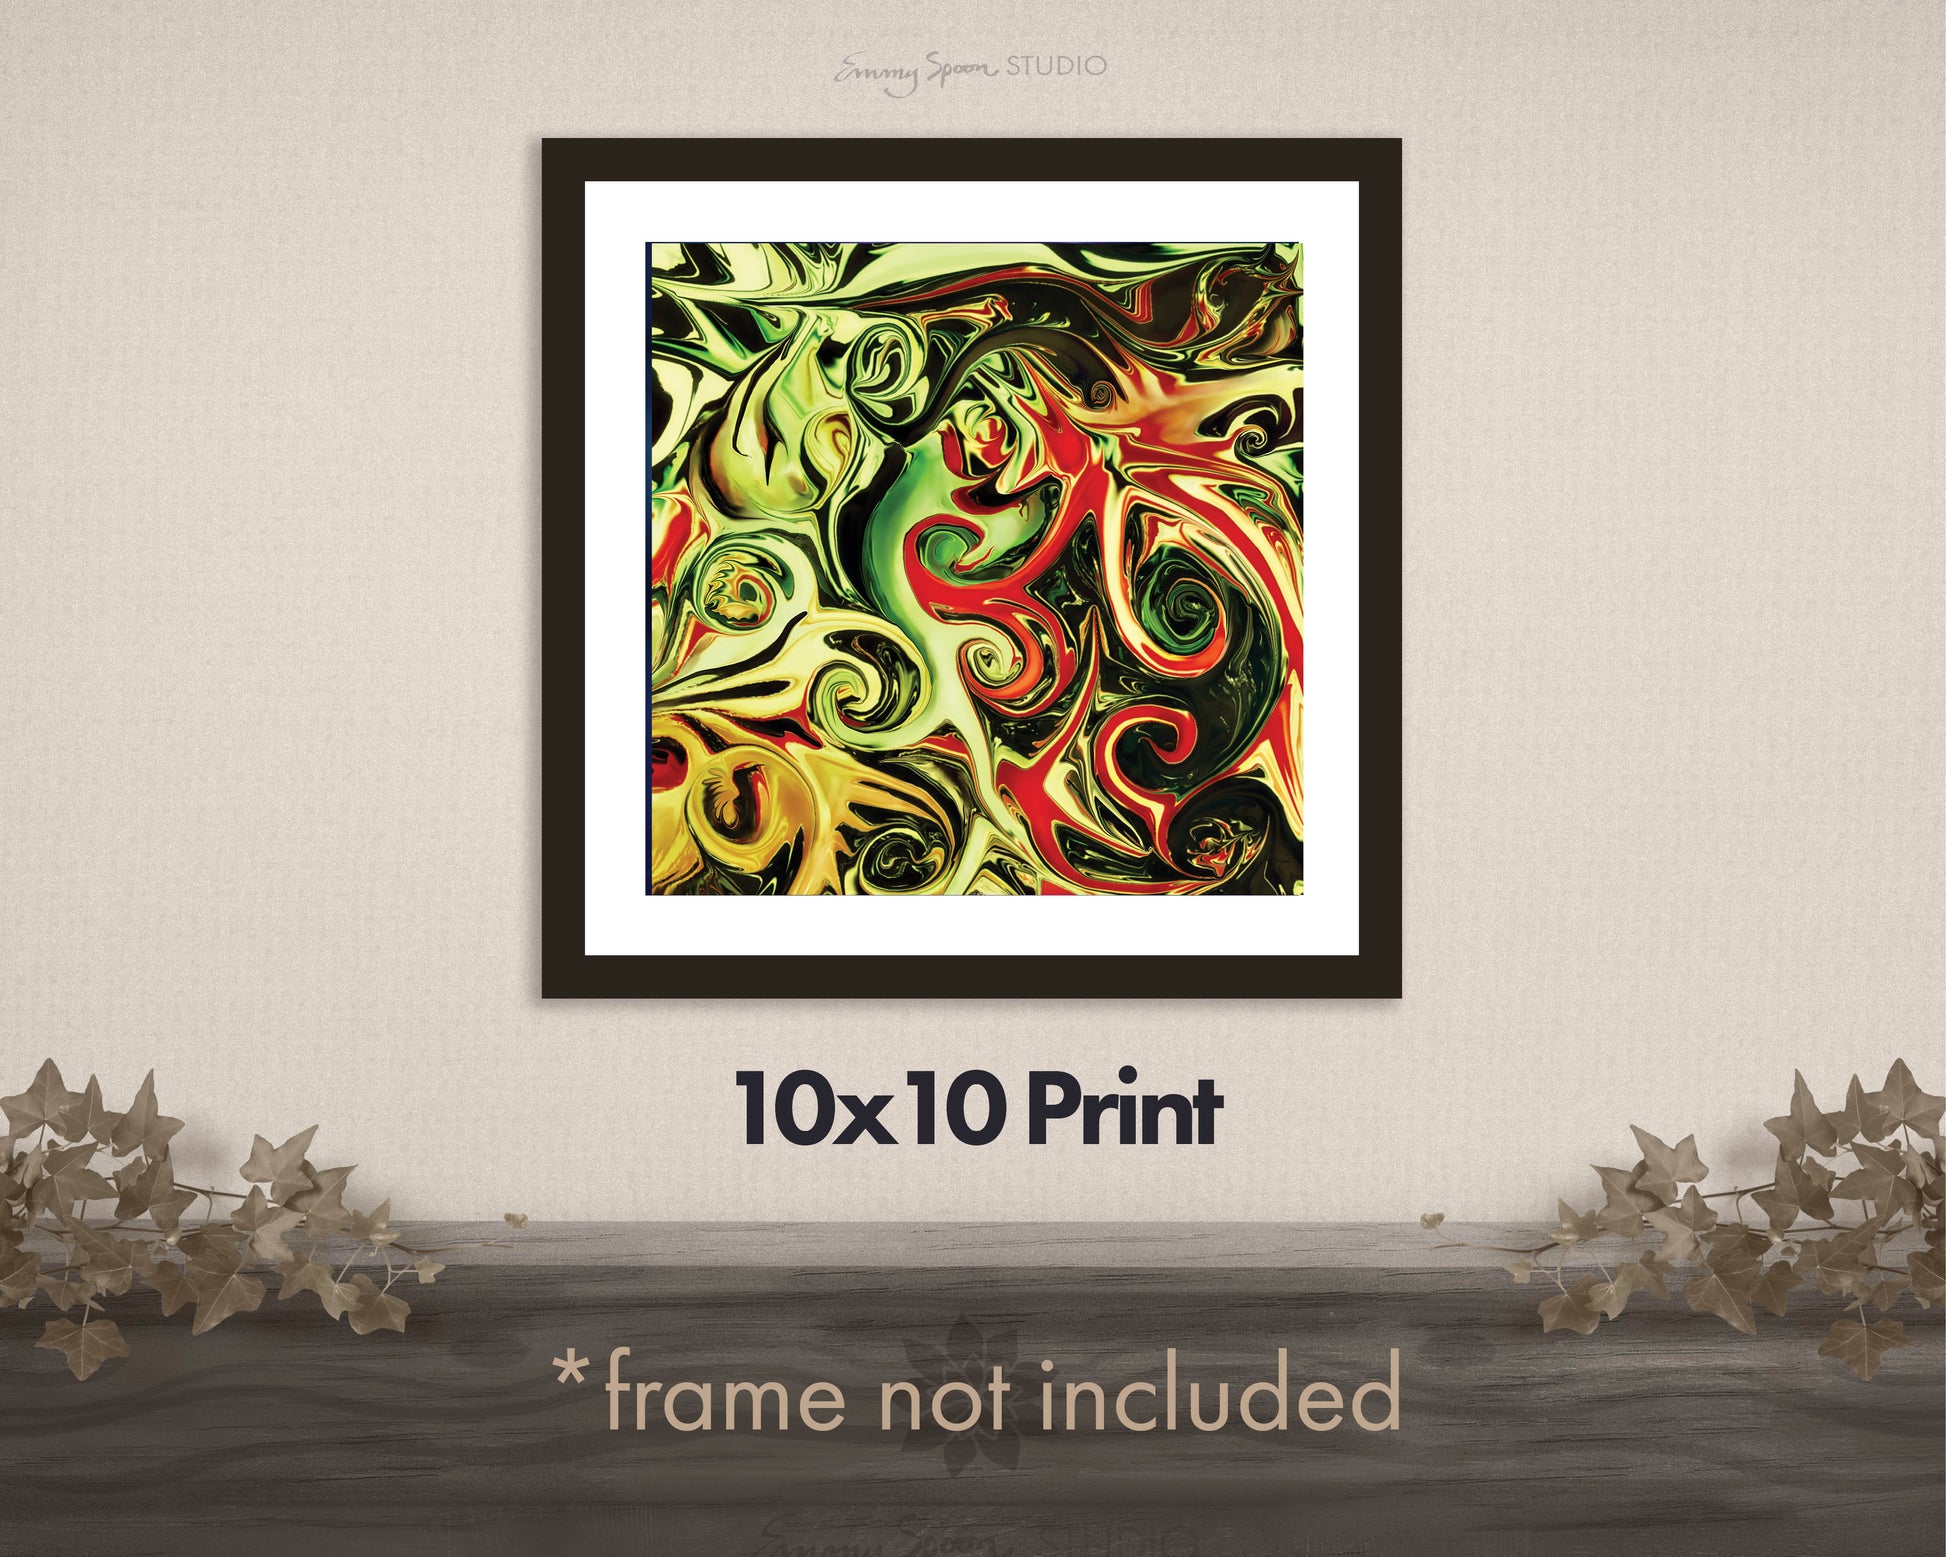 Lustre Art Print (Aging Swirl - 2014) by Emmy Spoon - 10x10 - frame not included